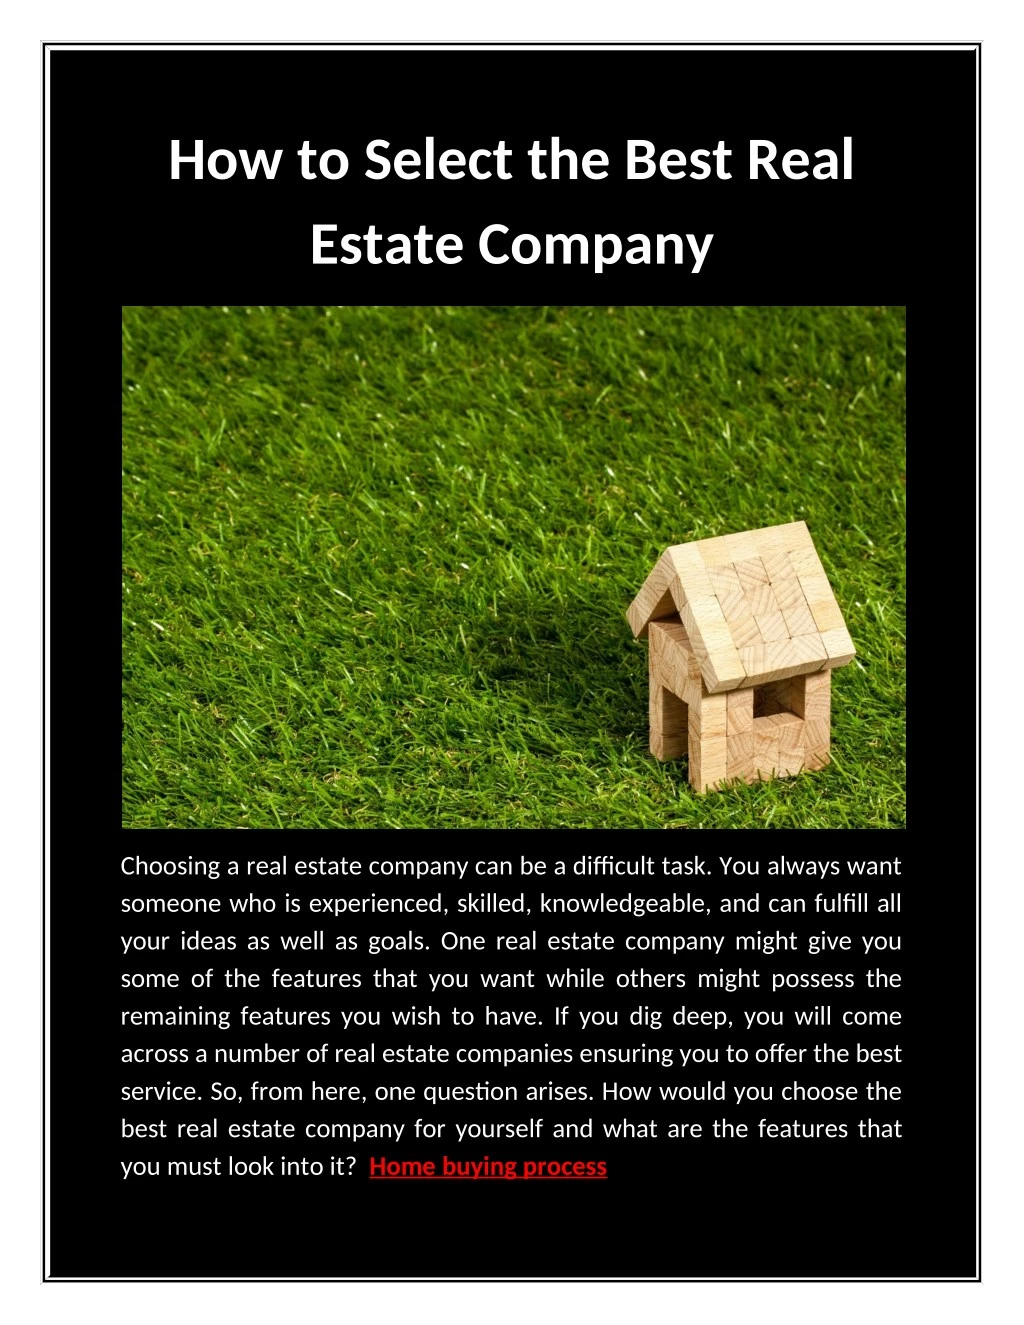 how to select the best real estate company